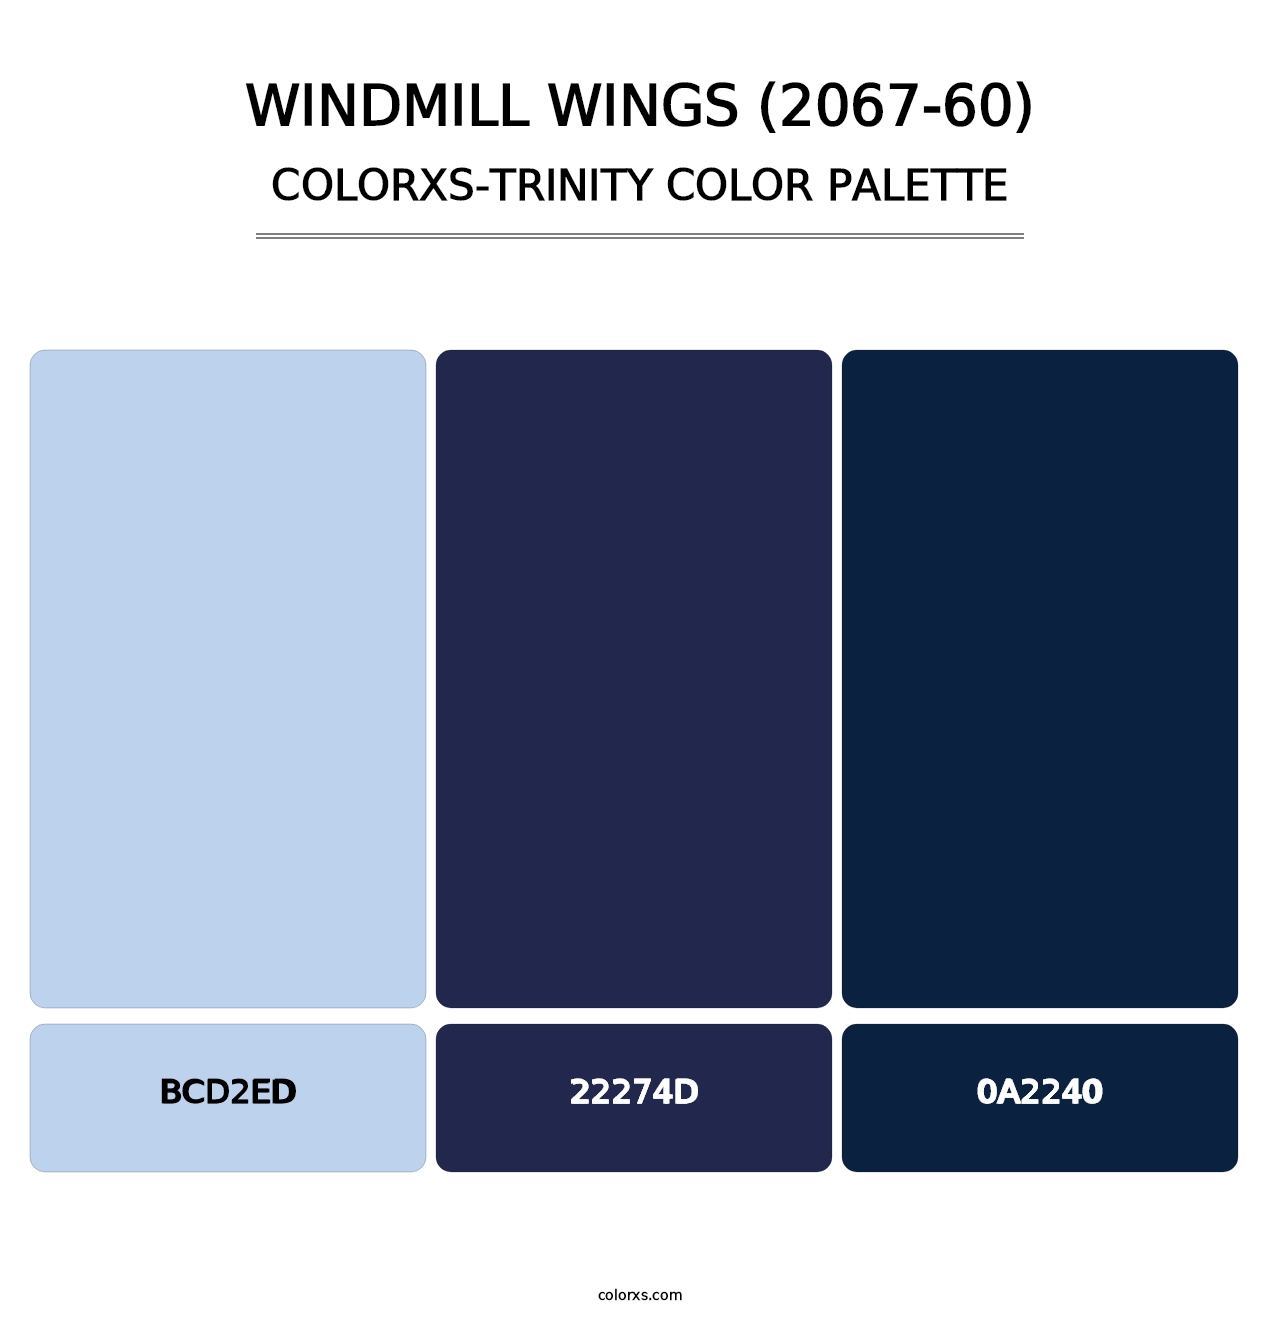 Windmill Wings (2067-60) - Colorxs Trinity Palette